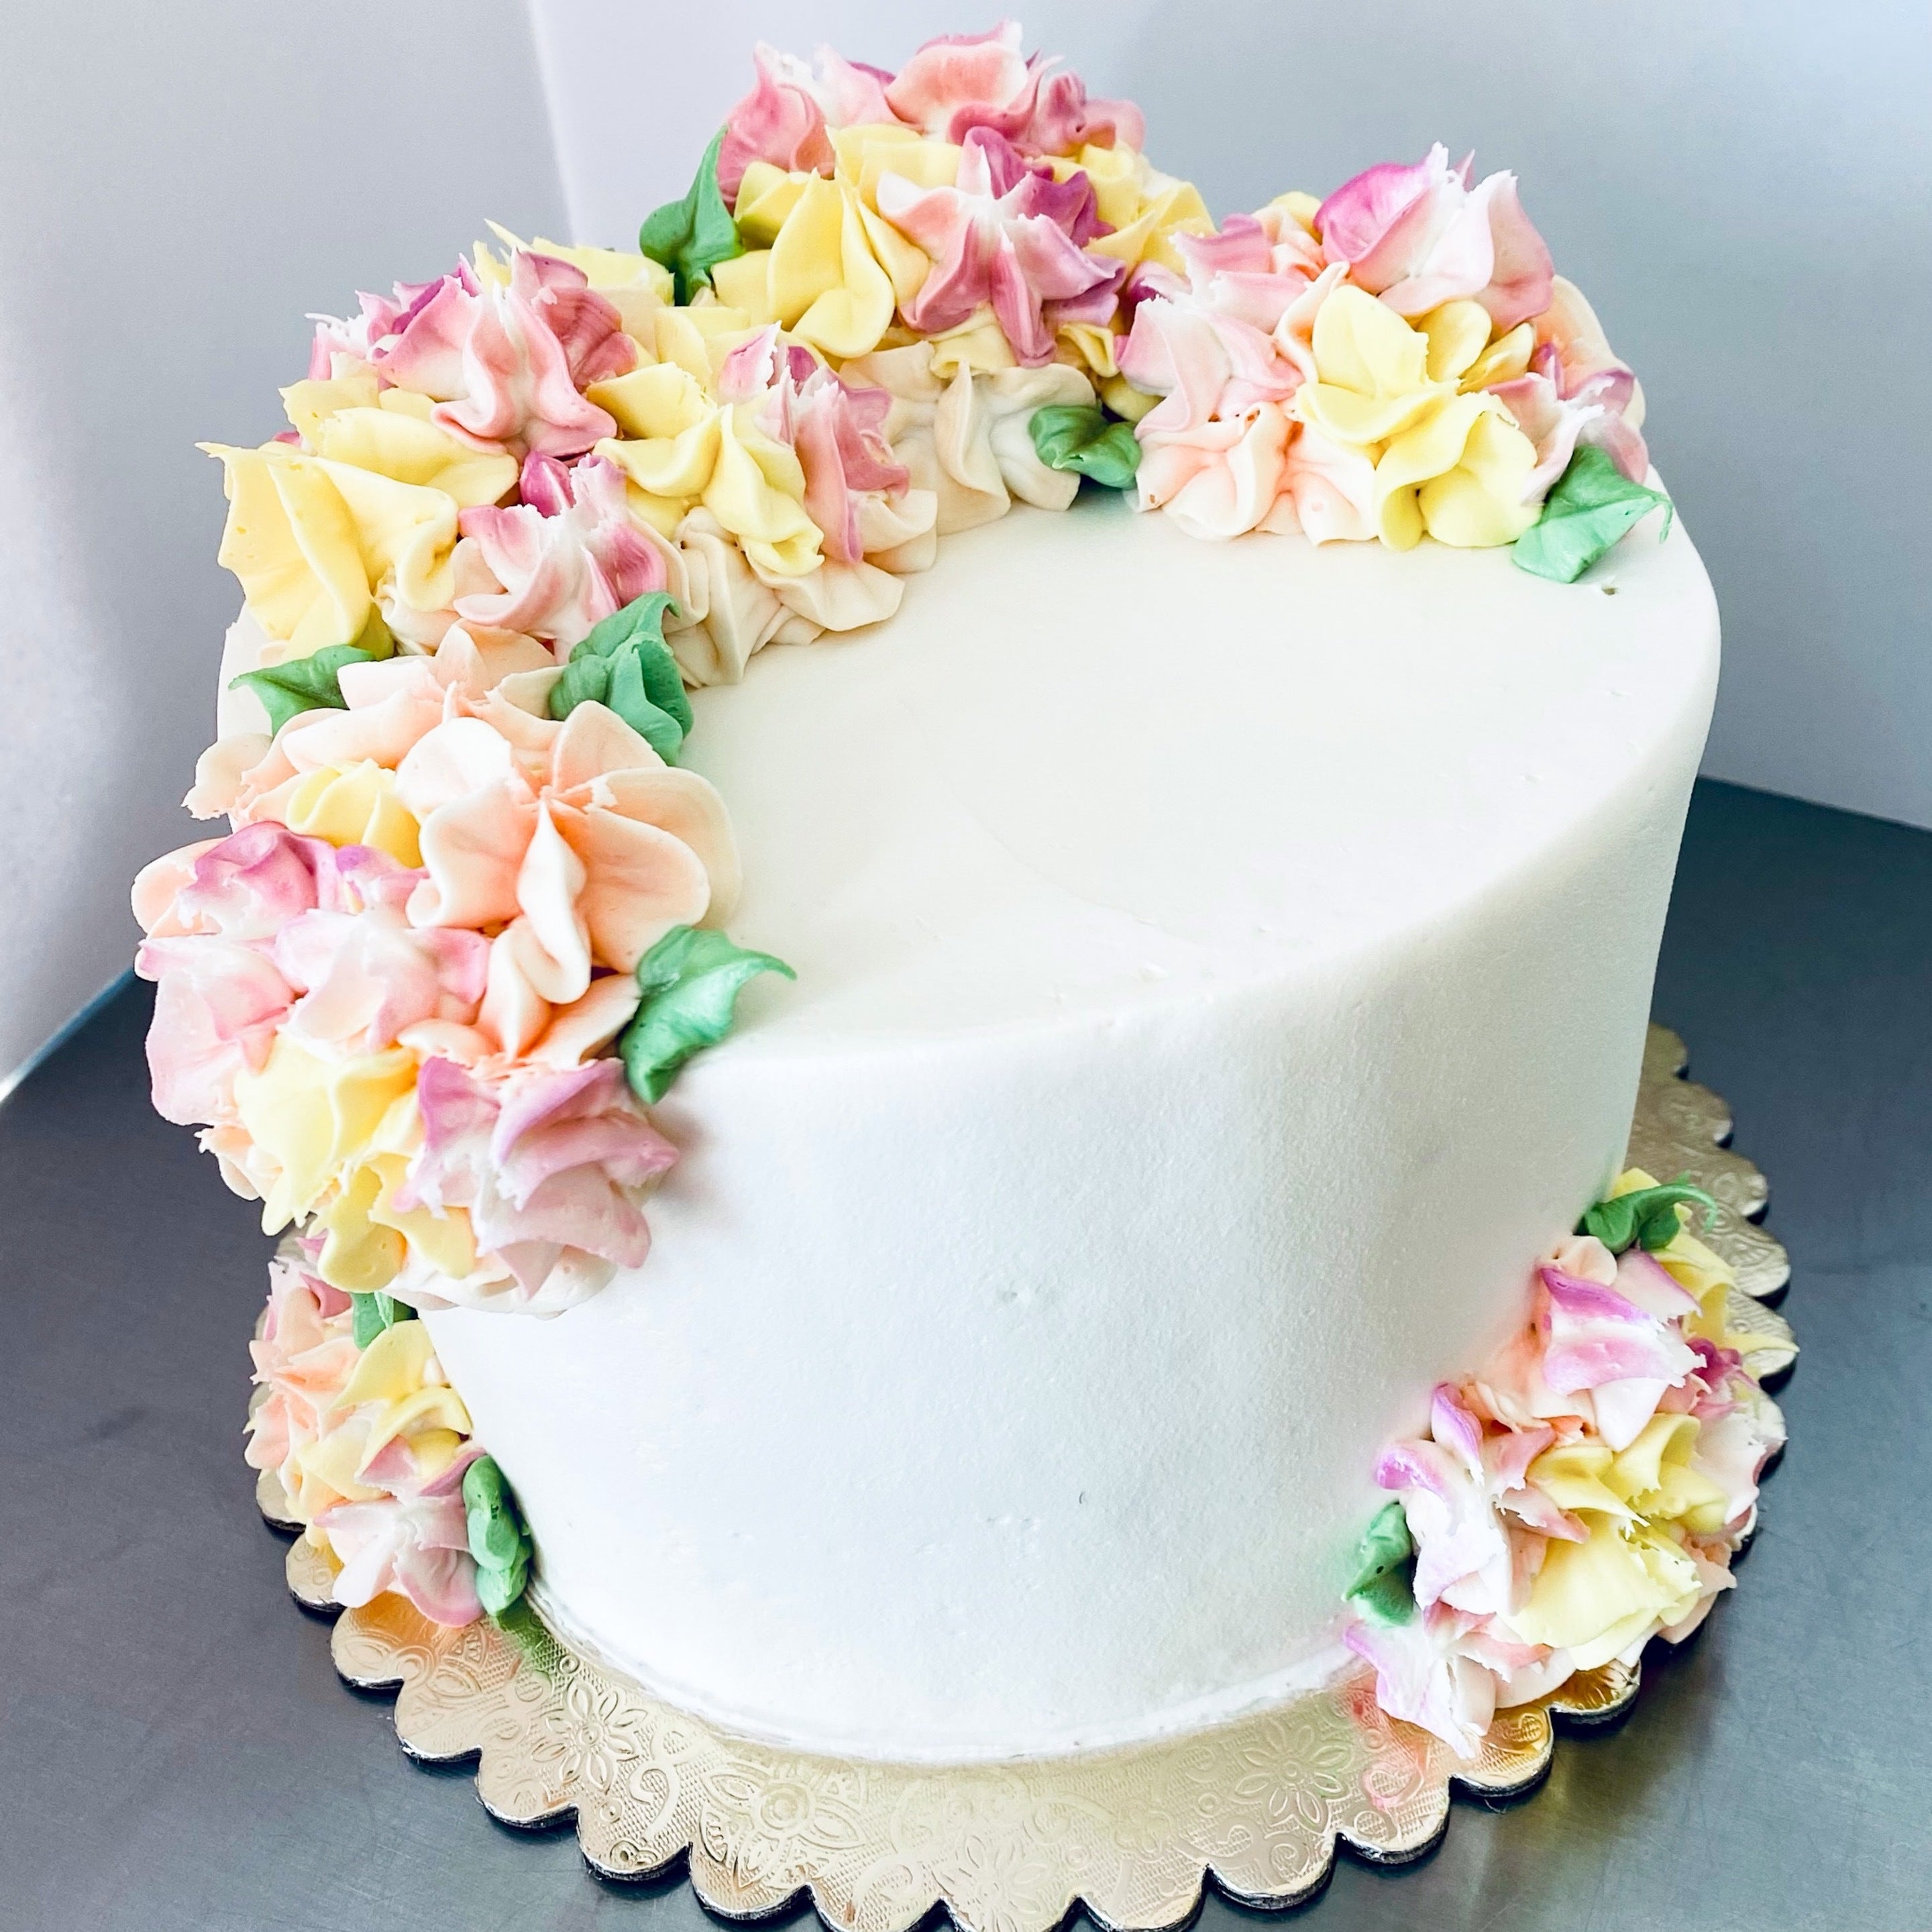 Wilton Cake Decorating - Such a beautiful spring hydrangea cake by Flour &  Floral! 💜 The varying shades of purple add a realistic effect! Click here  for more spring dessert ideas: http://ow.ly/ViCq50usSXF |